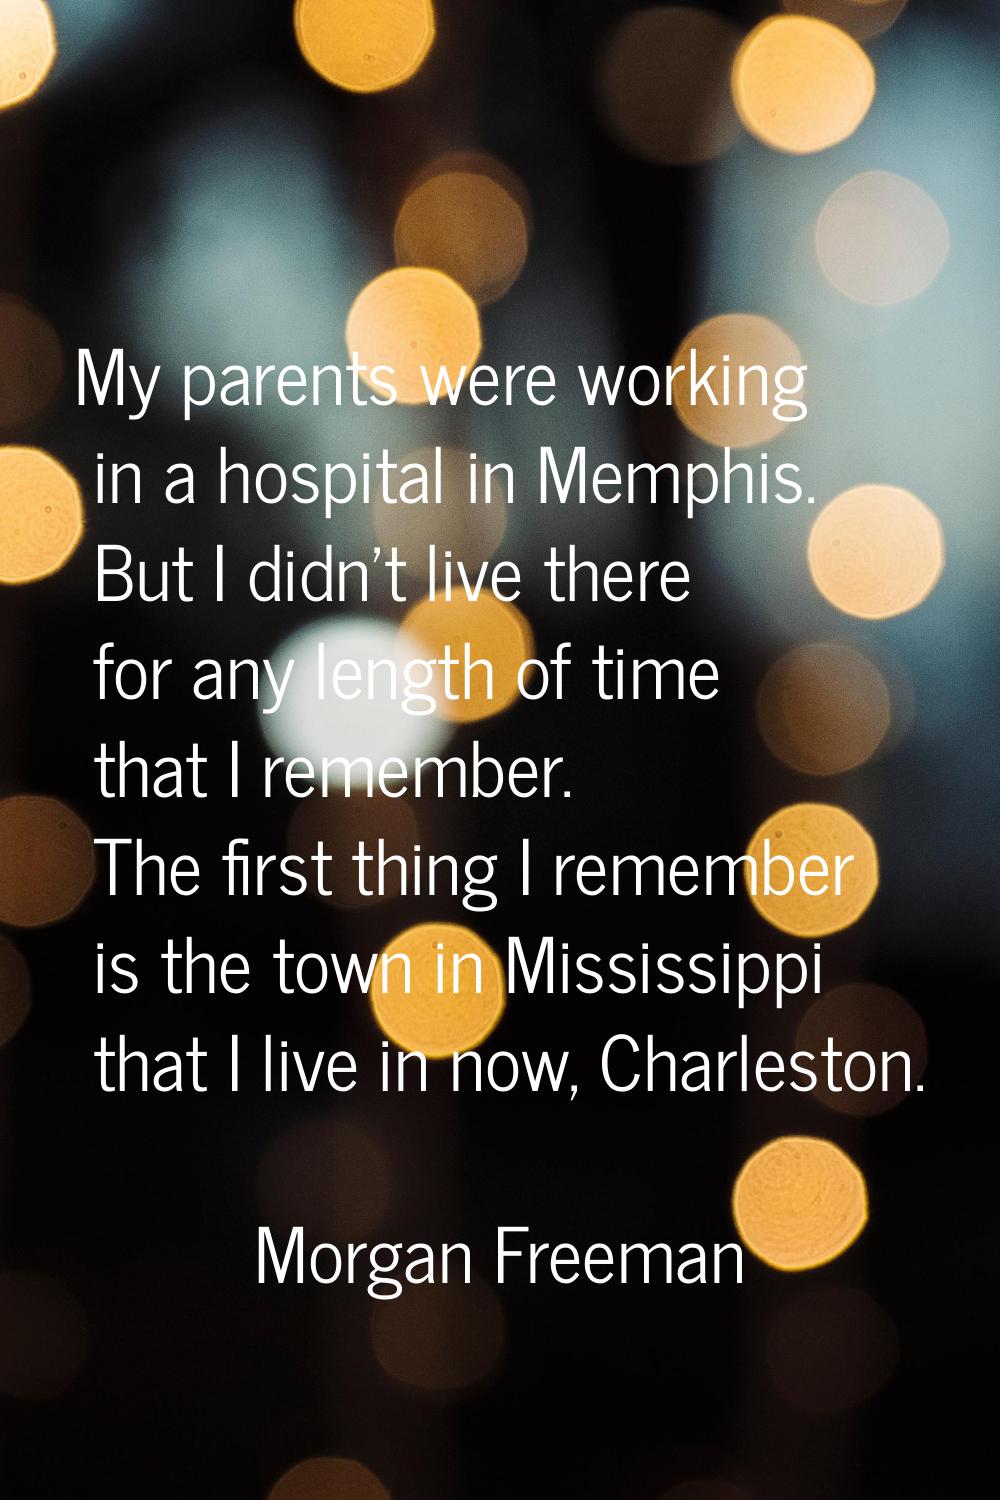 My parents were working in a hospital in Memphis. But I didn't live there for any length of time th